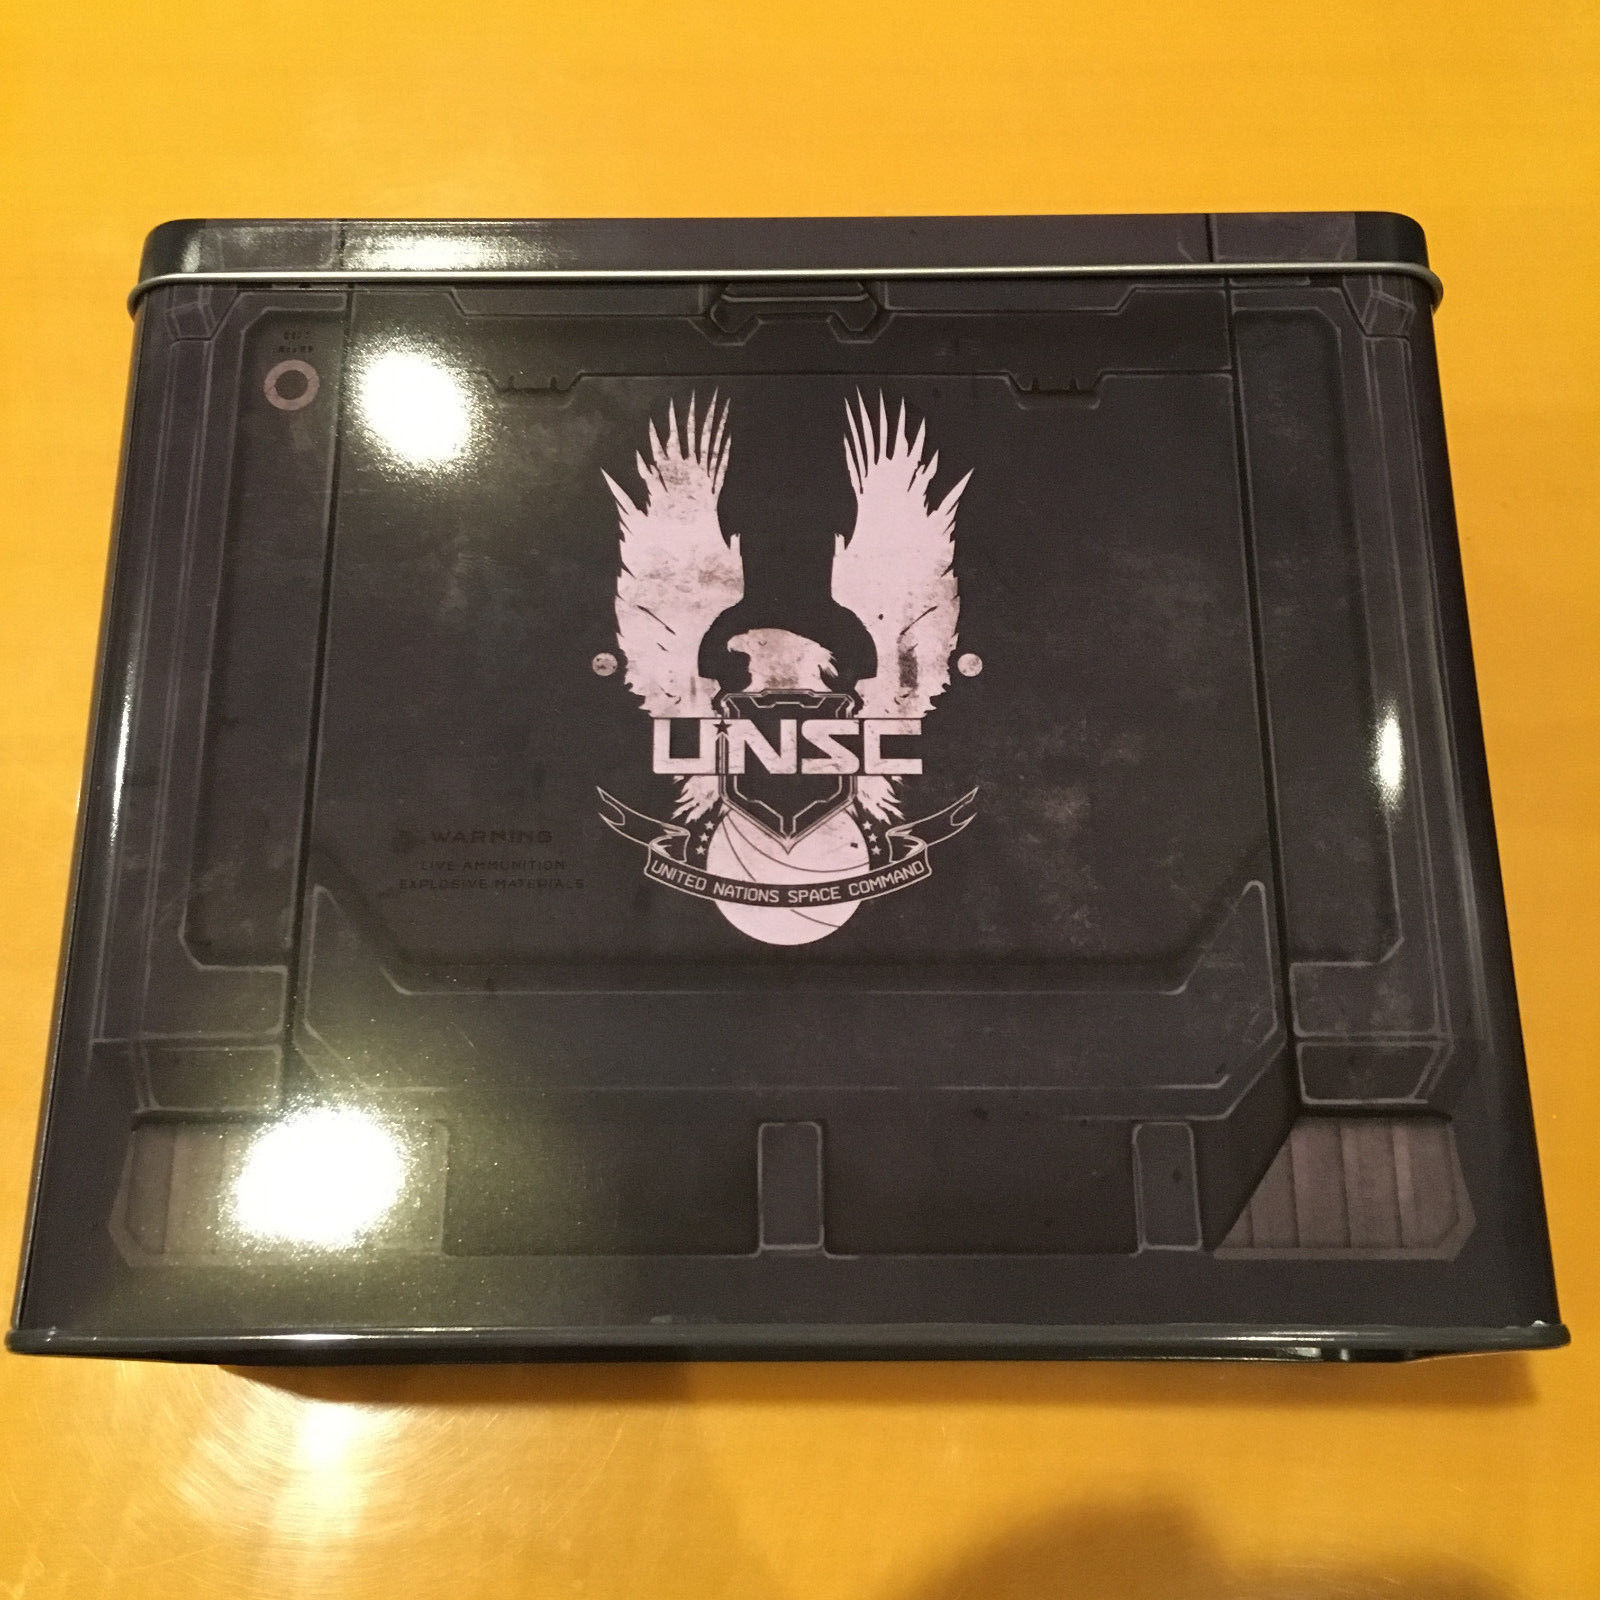 Primary image for Halo 4 Ammo Crate Tin Lunch Box, USNC (loot Crate)